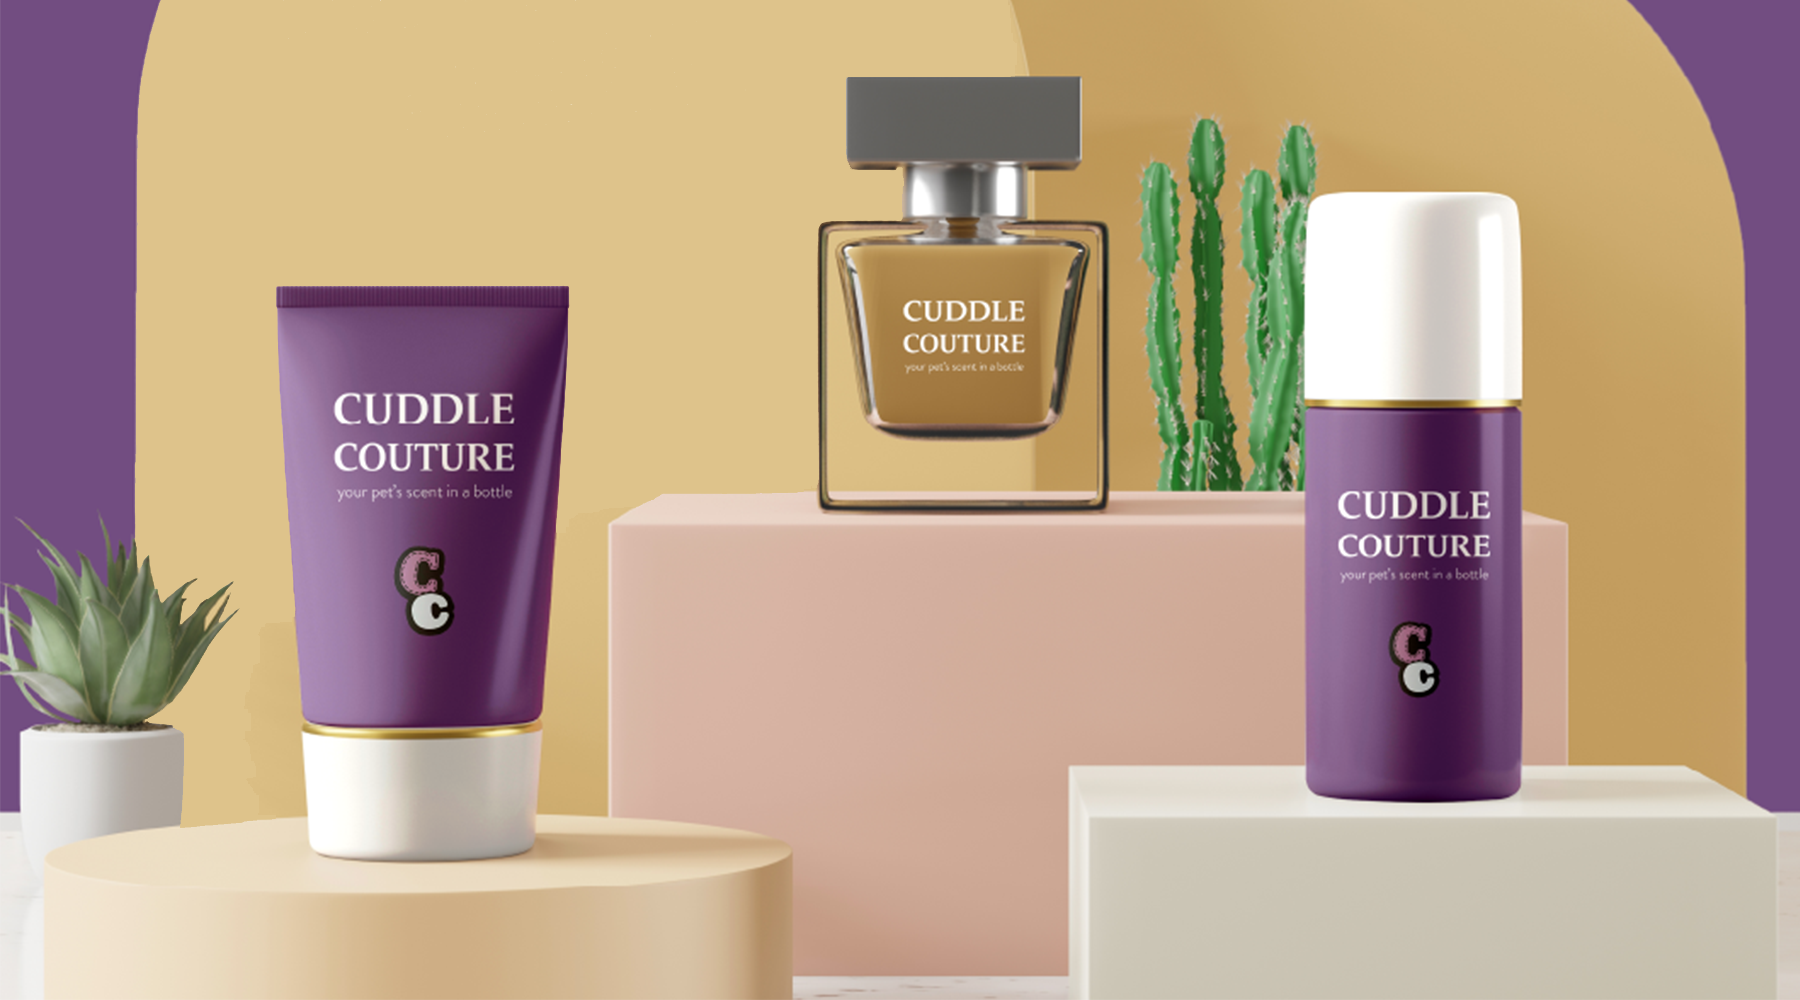 Introducing Cuddle Couture,  A Brand New Cosmetics Line by Cuddle Clones!